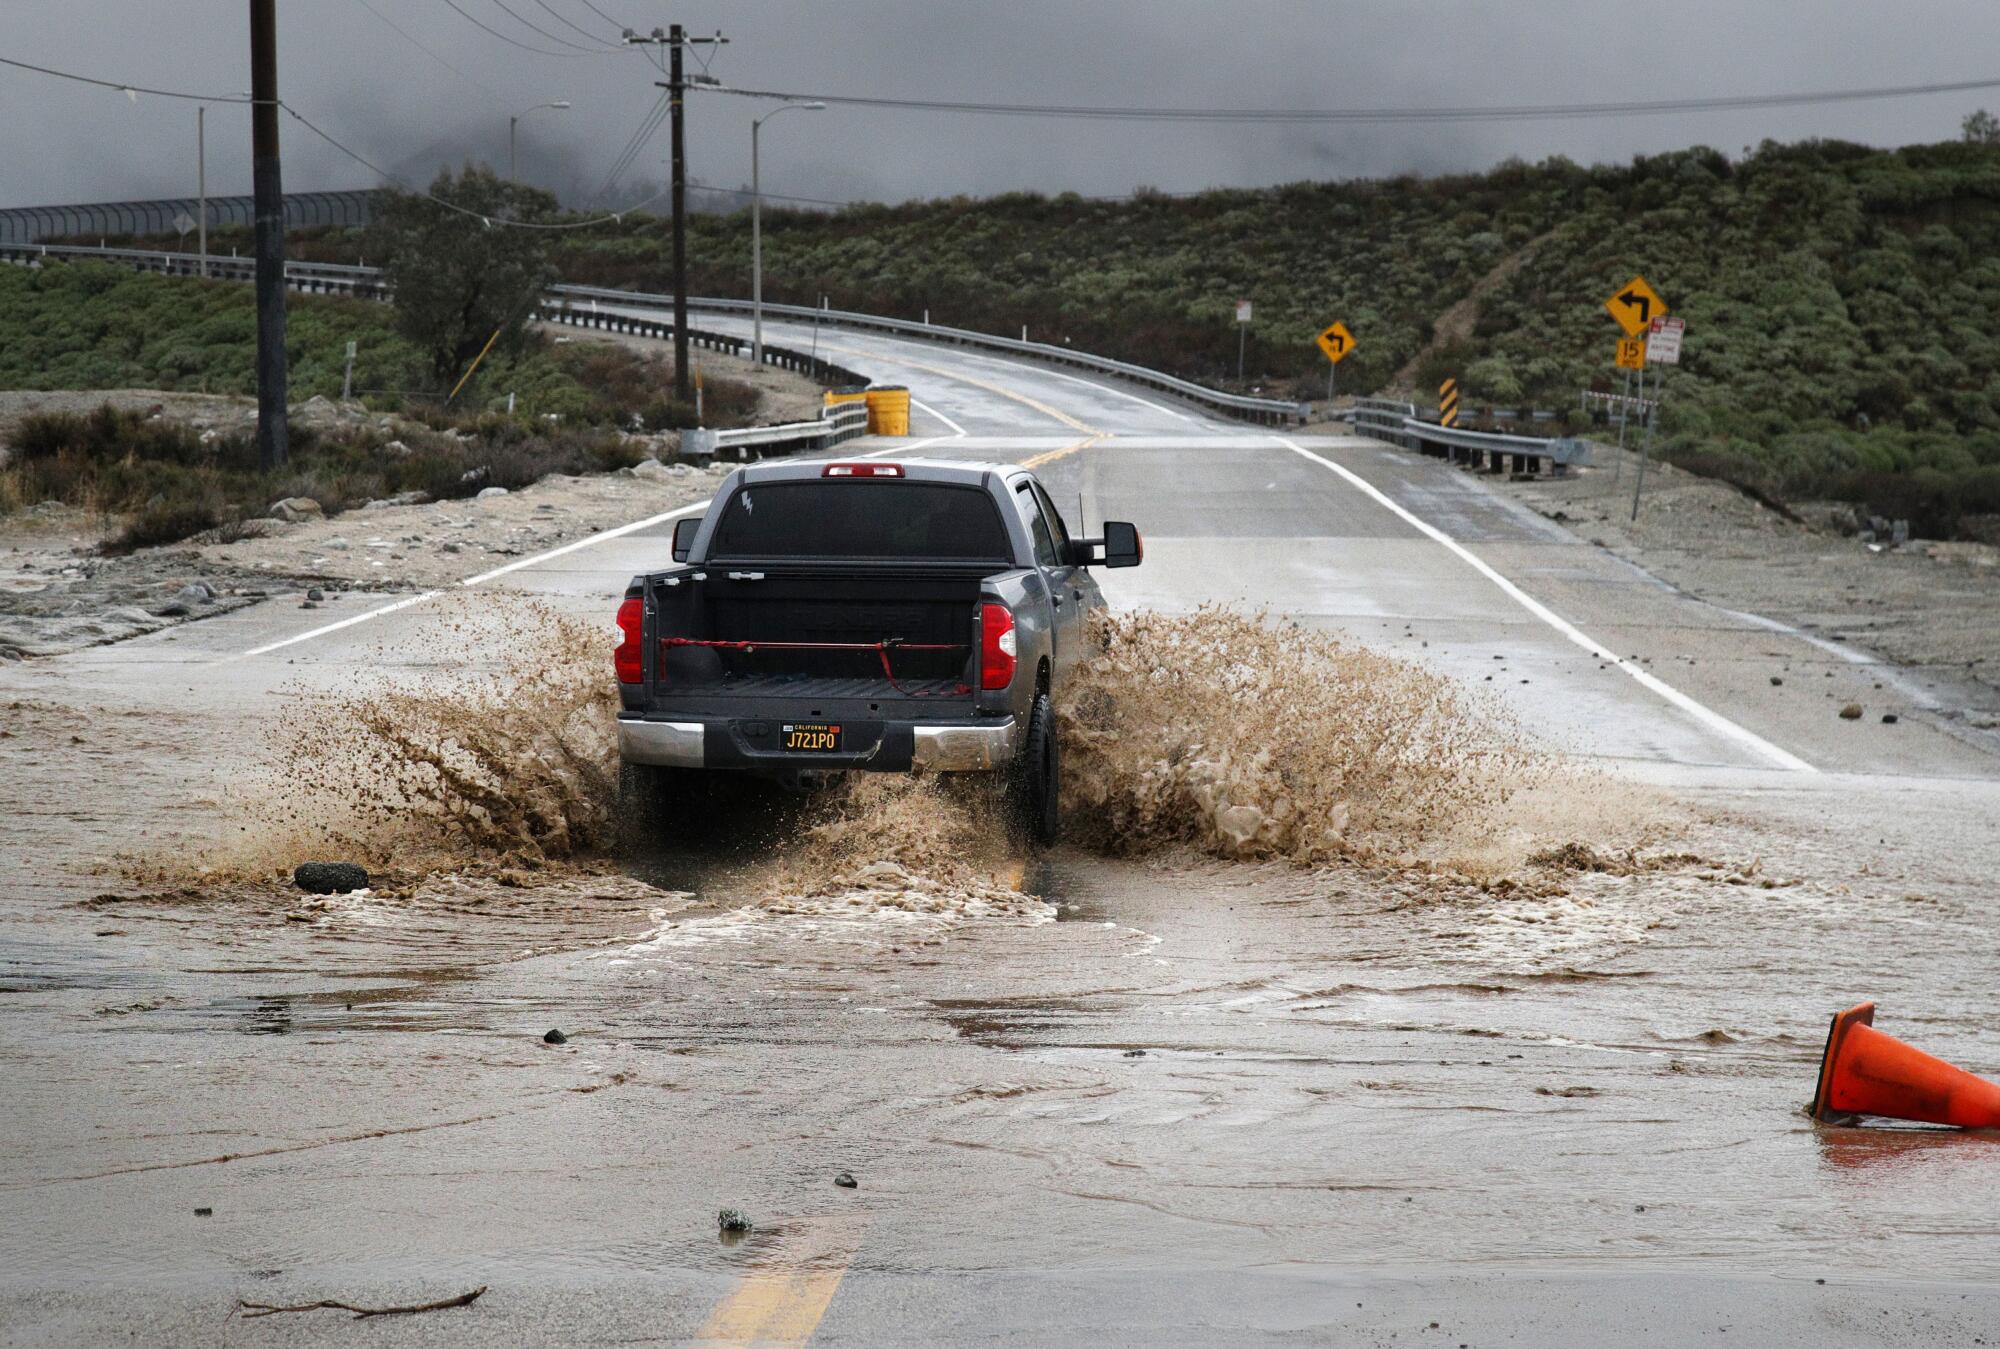 A driver disobeys road closure signs and drives through the flooded Glen Helen Parkway during Tuesday's storm in Devore.